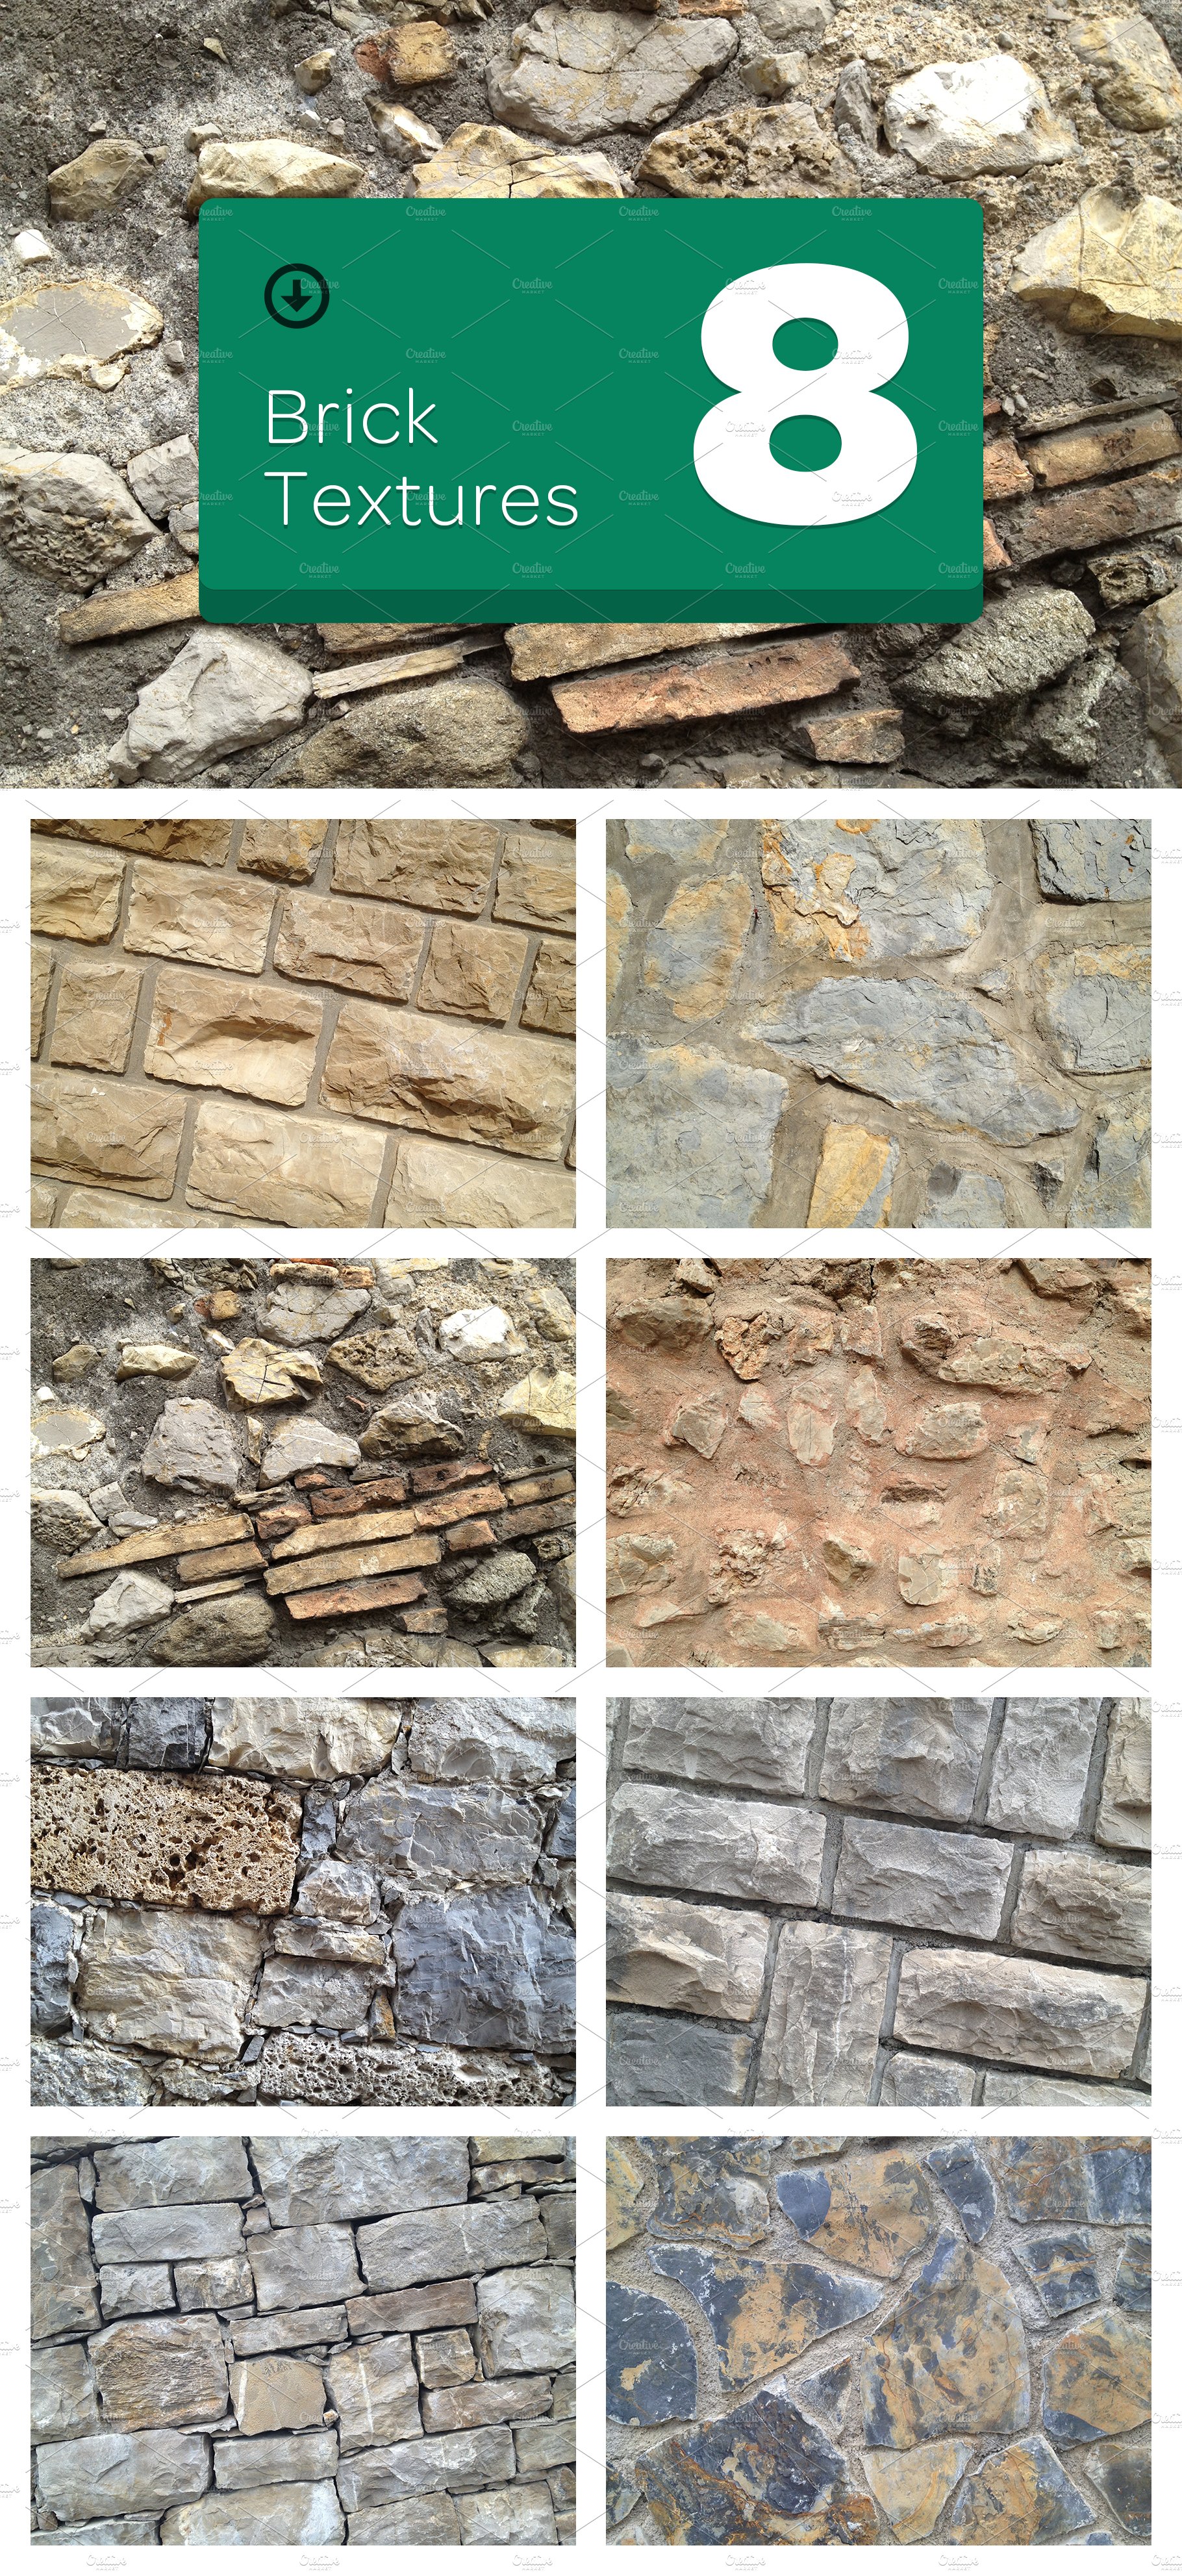 8 Brick Textures cover image.